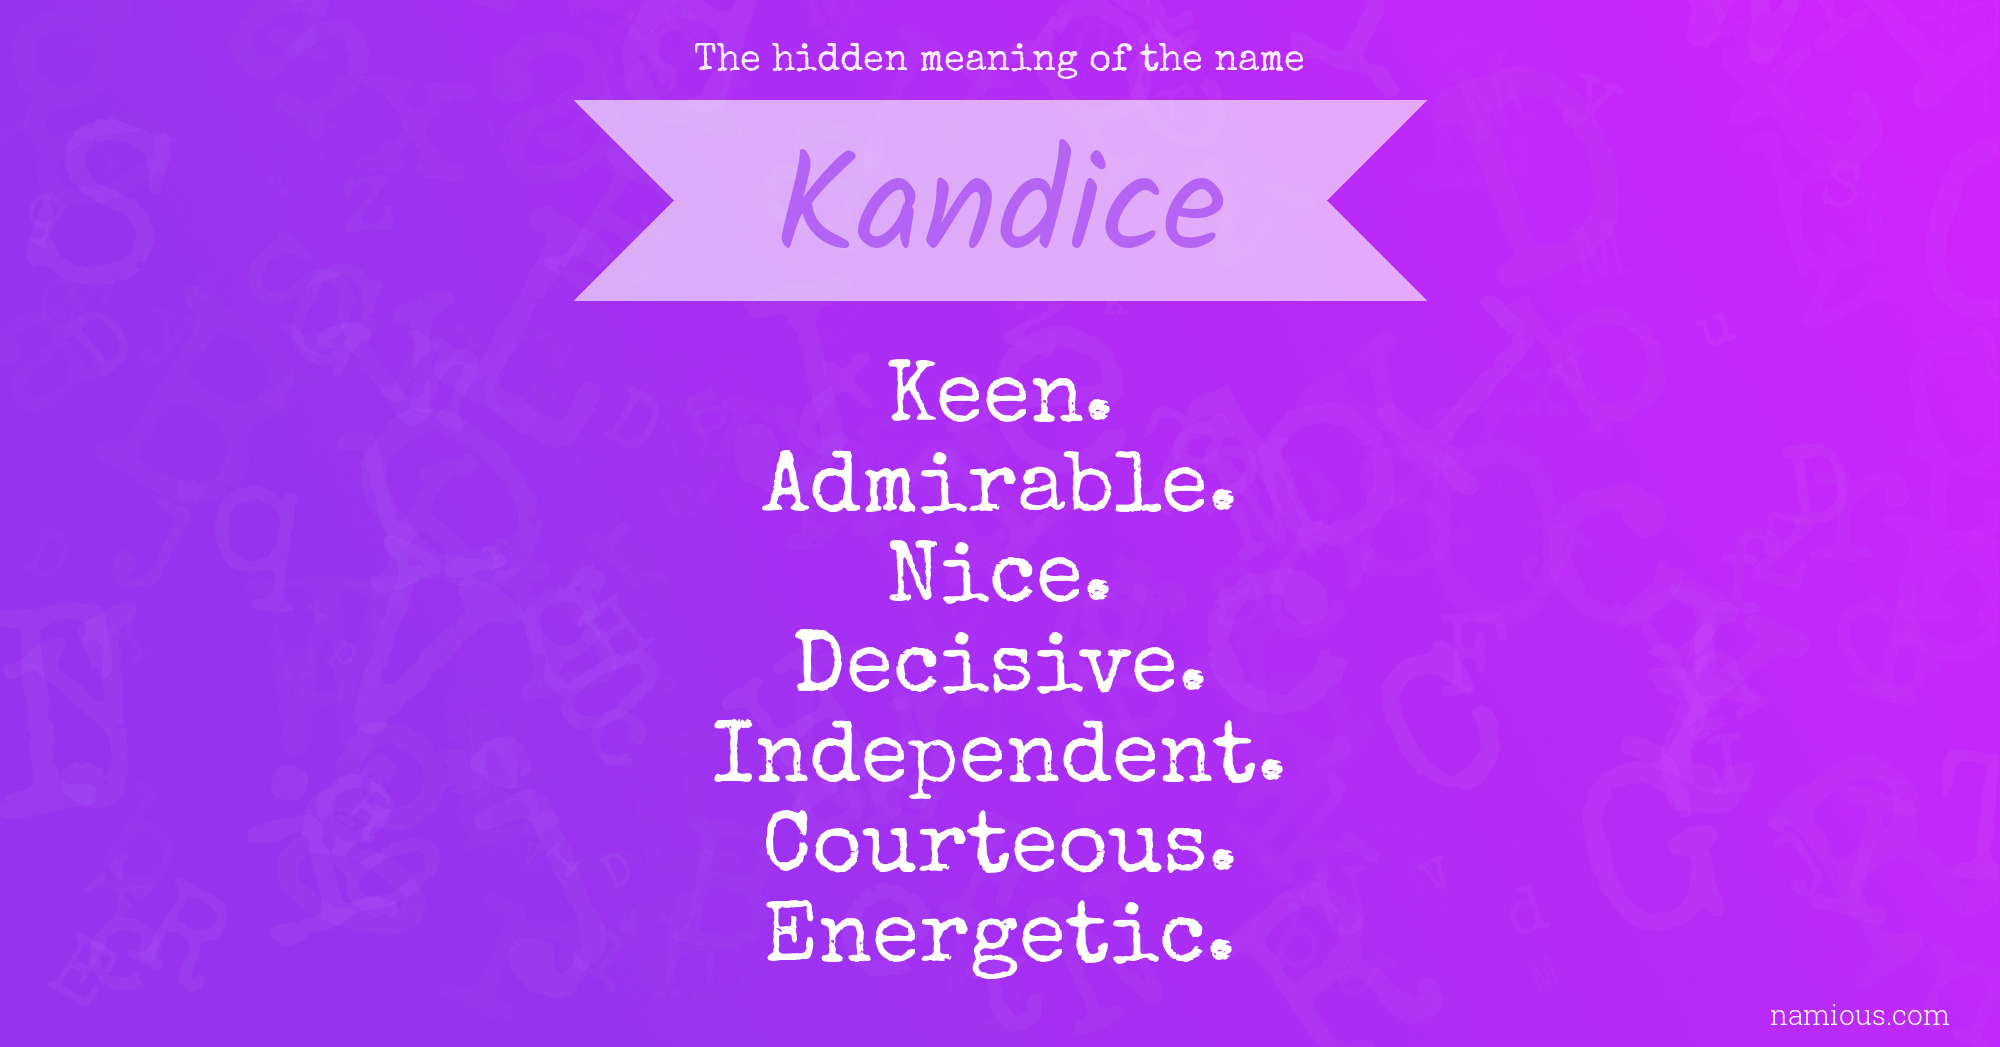 The hidden meaning of the name Kandice